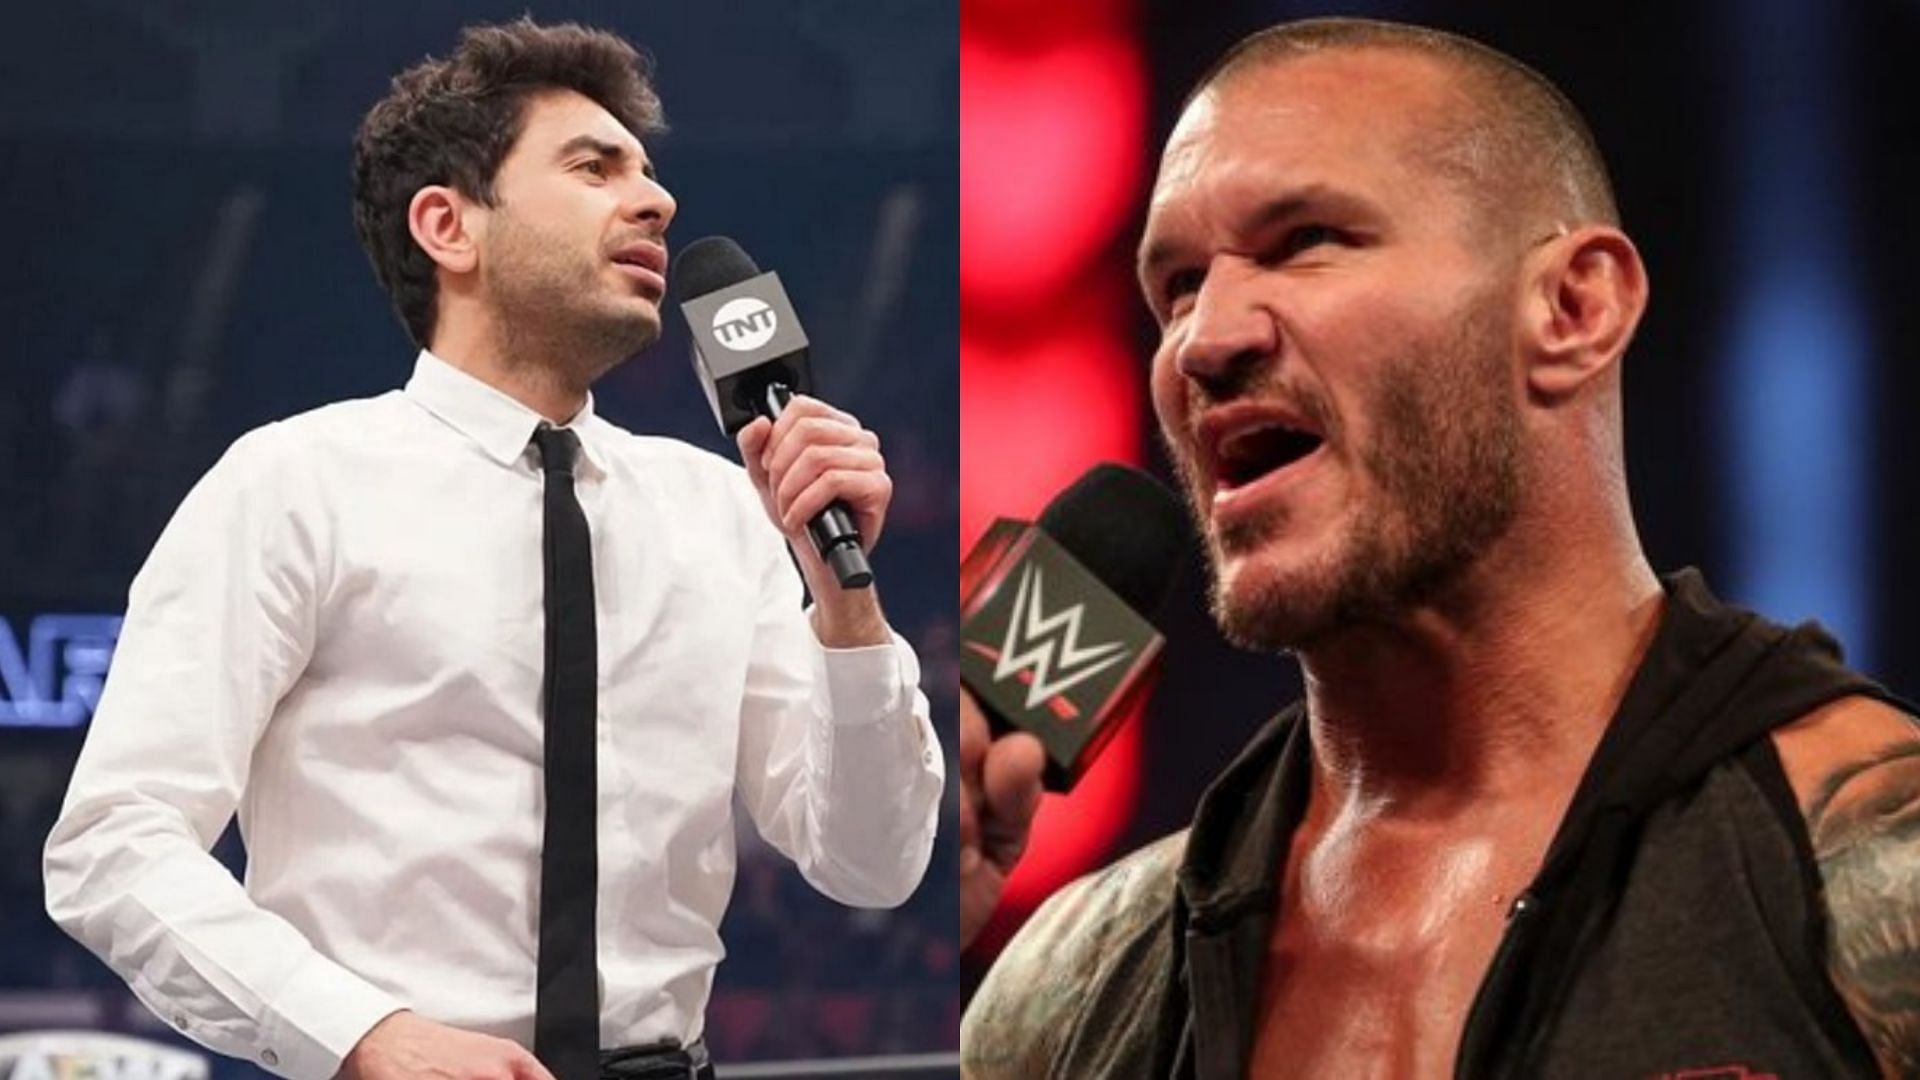 AEW President Tony Khan (left) and WWE Superstar Randy Orton (right) have clashed on Twitter